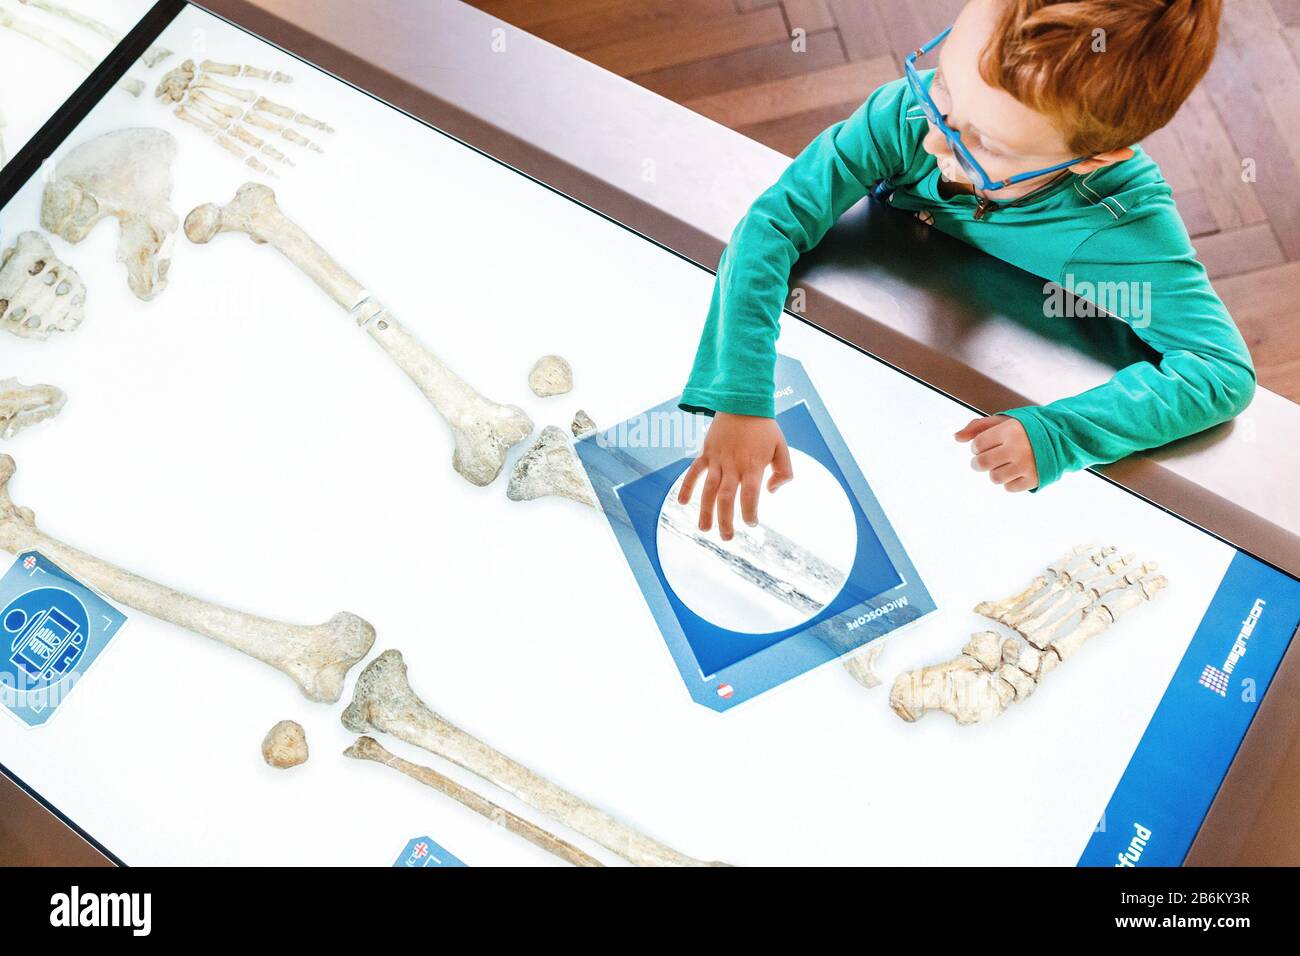 24 MARCH 2017, VIENNA, MUSEUM OF NATURAL HISTORY, AUSTRIA: Little red boy prodigy and geek study human anatomy using an interactive computer board Stock Photo